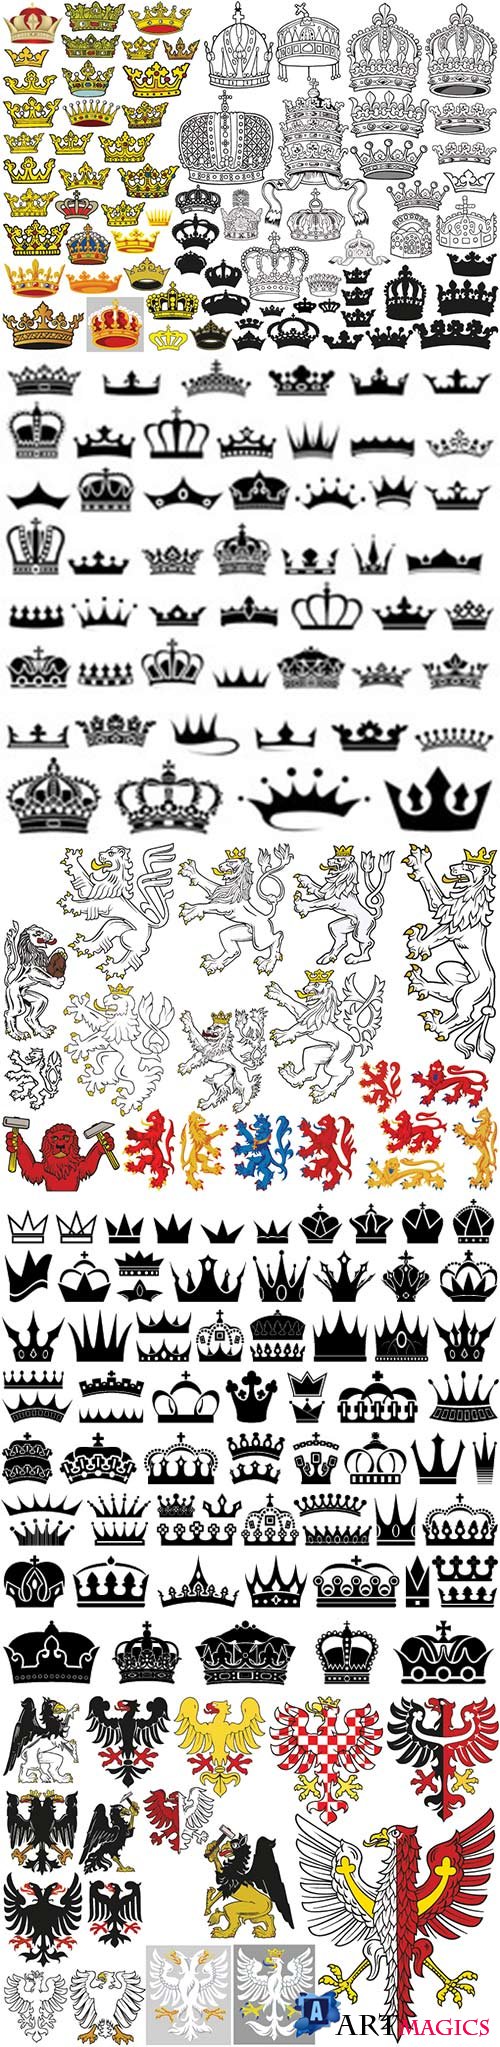 Big set of heraldic crowns in colored illustrations